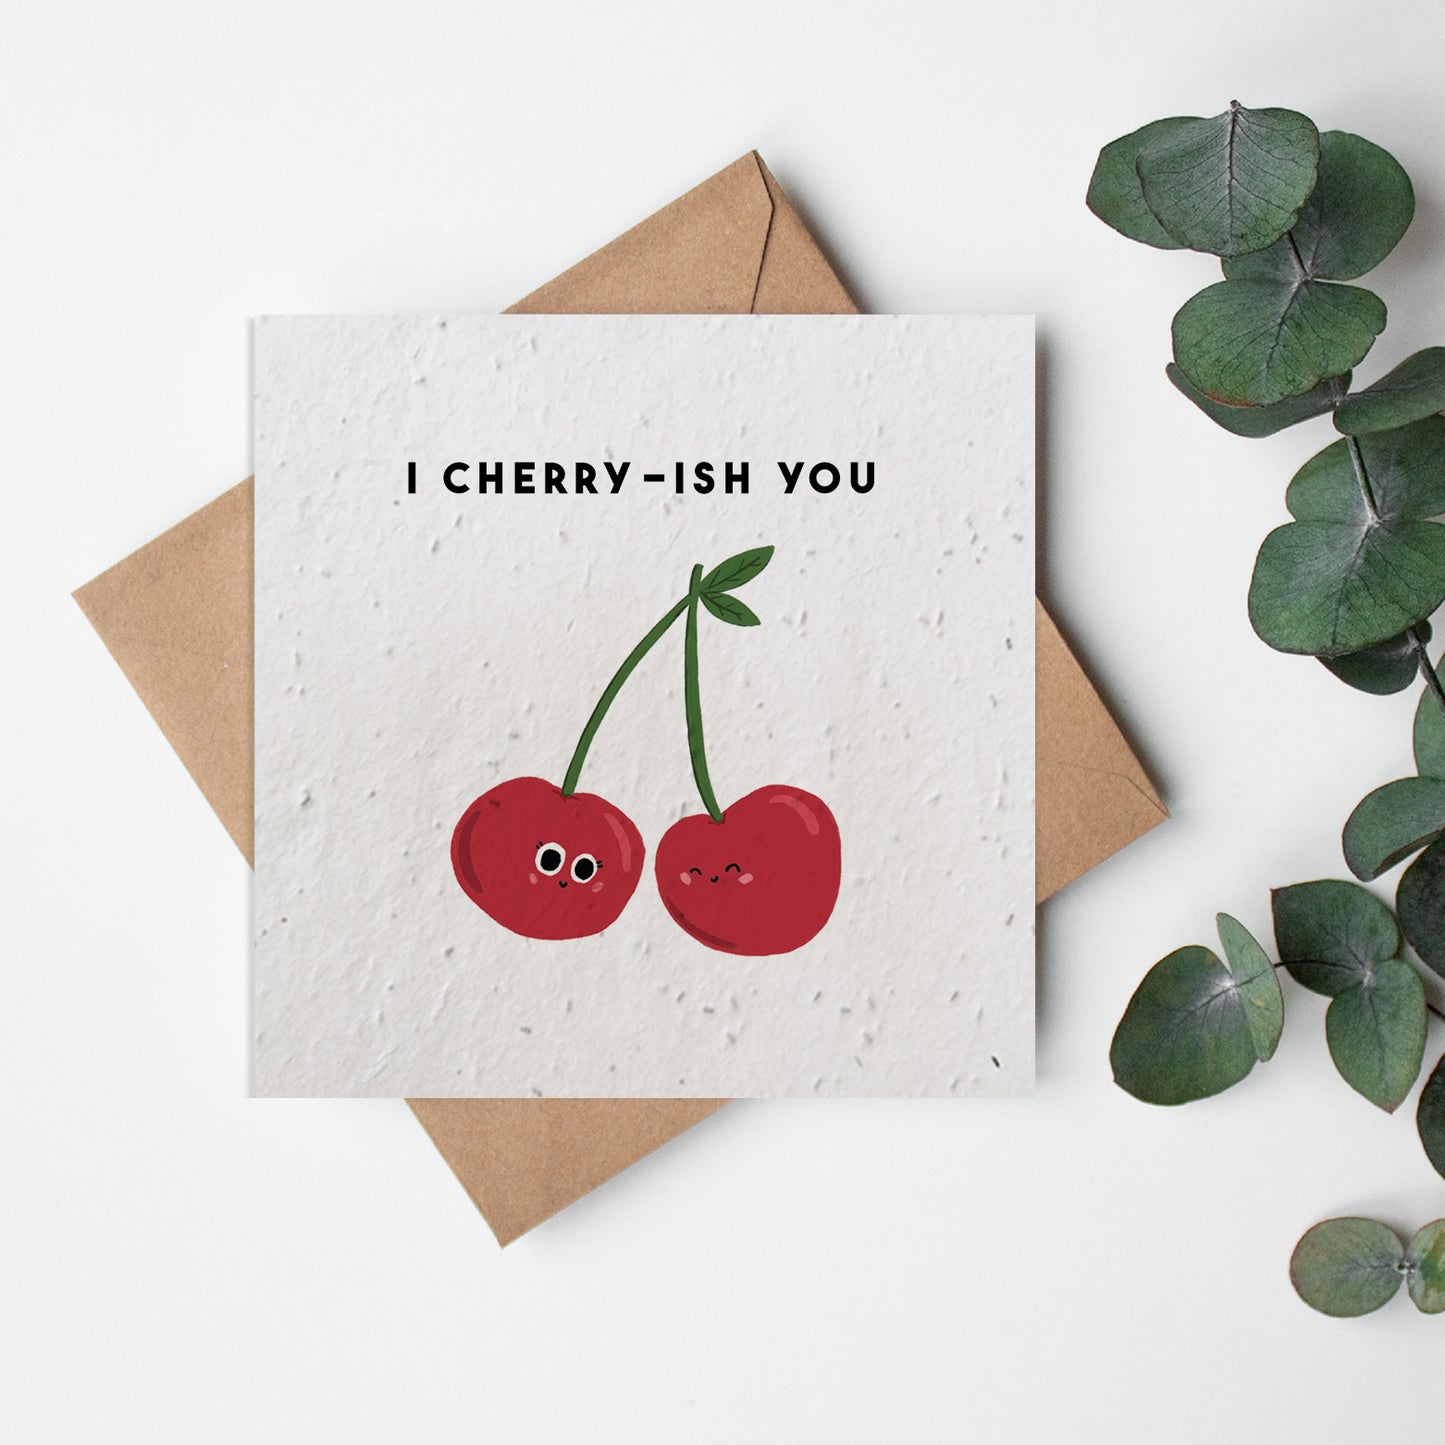 Fruit & Veg Collection - Cherry-ish You